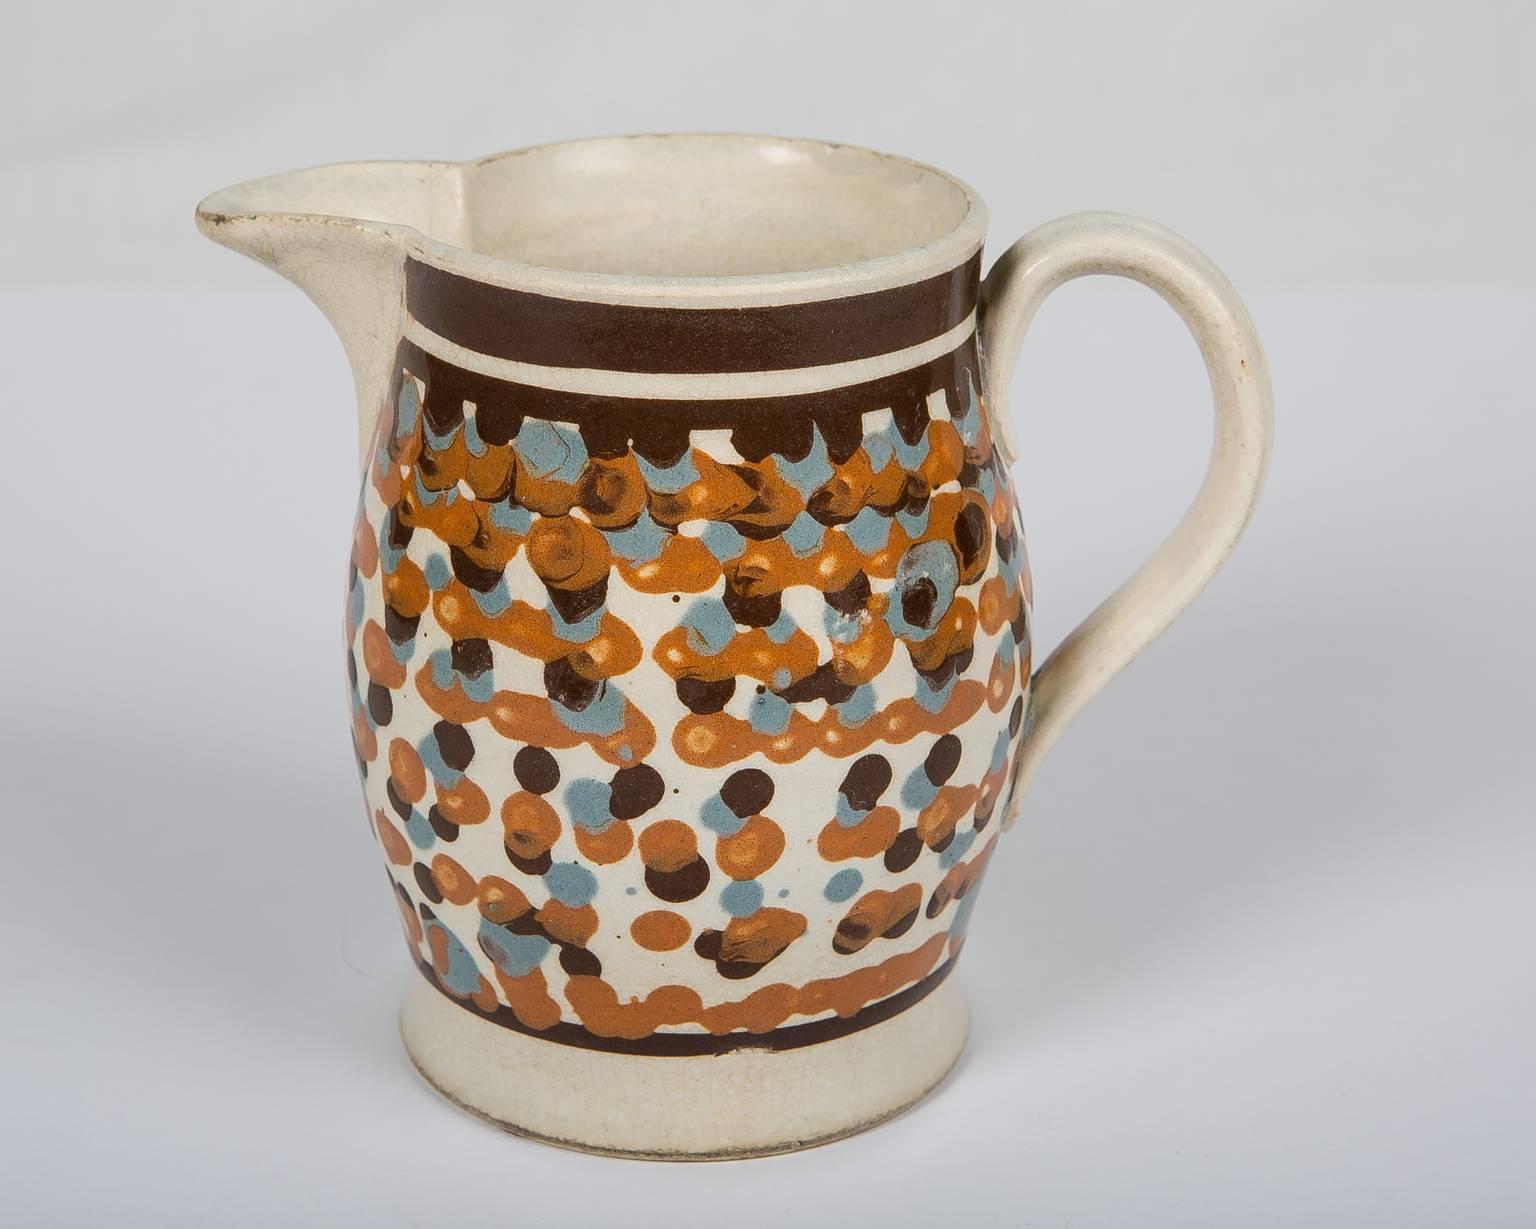 A mochaware pottery jug decorated with multicolored slip, dots. On this jug the slip would have been applied with a three chambered cup. During the process the quills were sometimes separated and dragged on the surface of the jug. The result is an